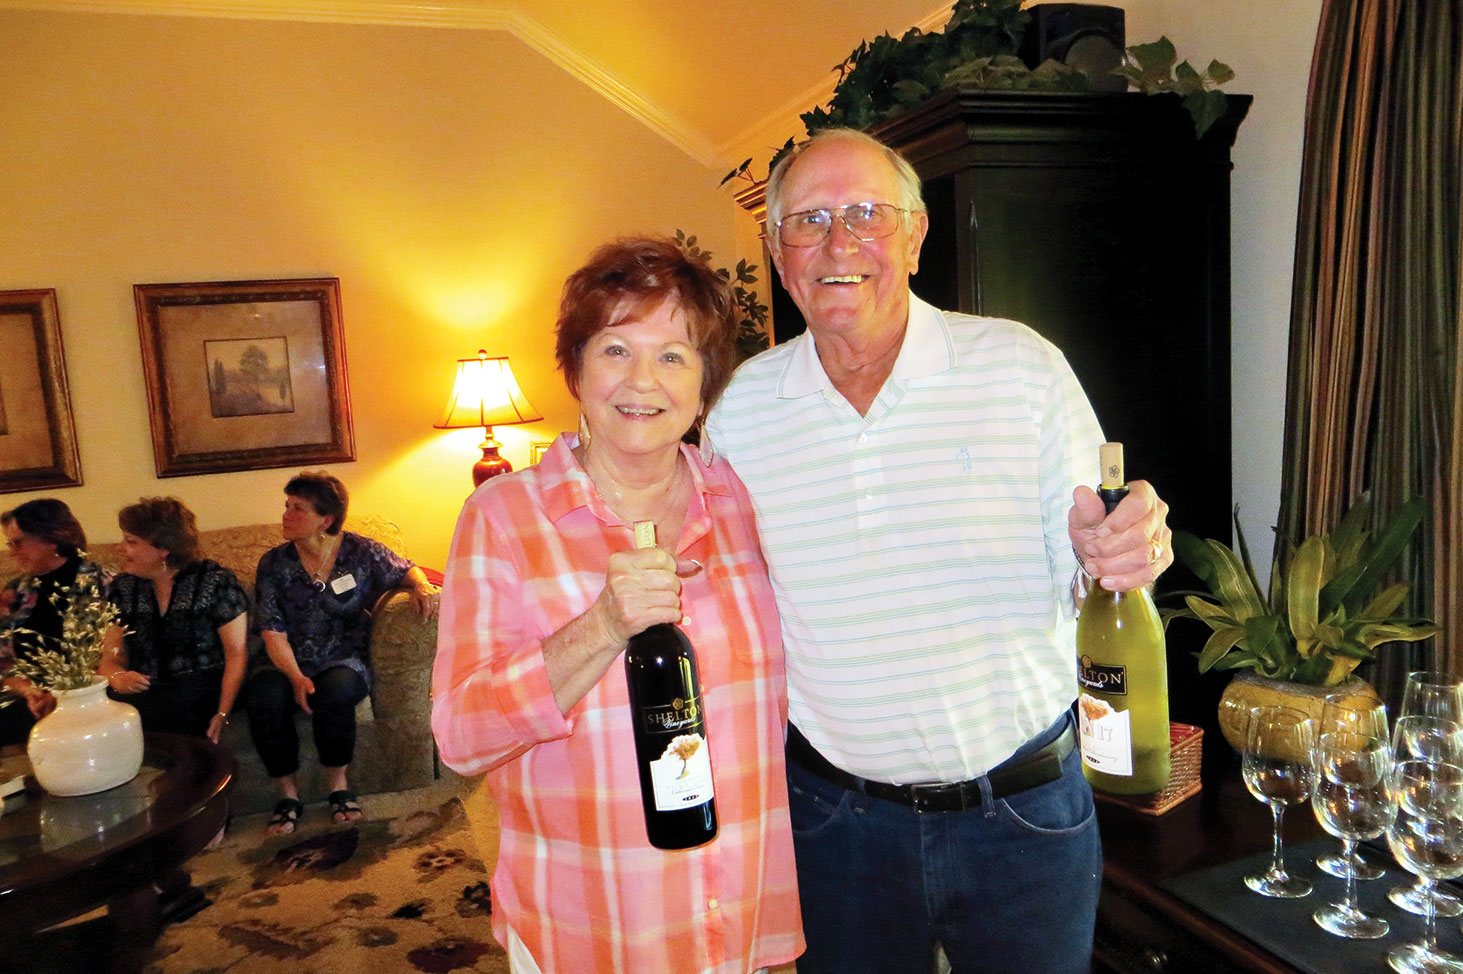 Wine Knots were “tickled pink” by MaryAnn and Mike Ballard’s North Carolina wine selections.